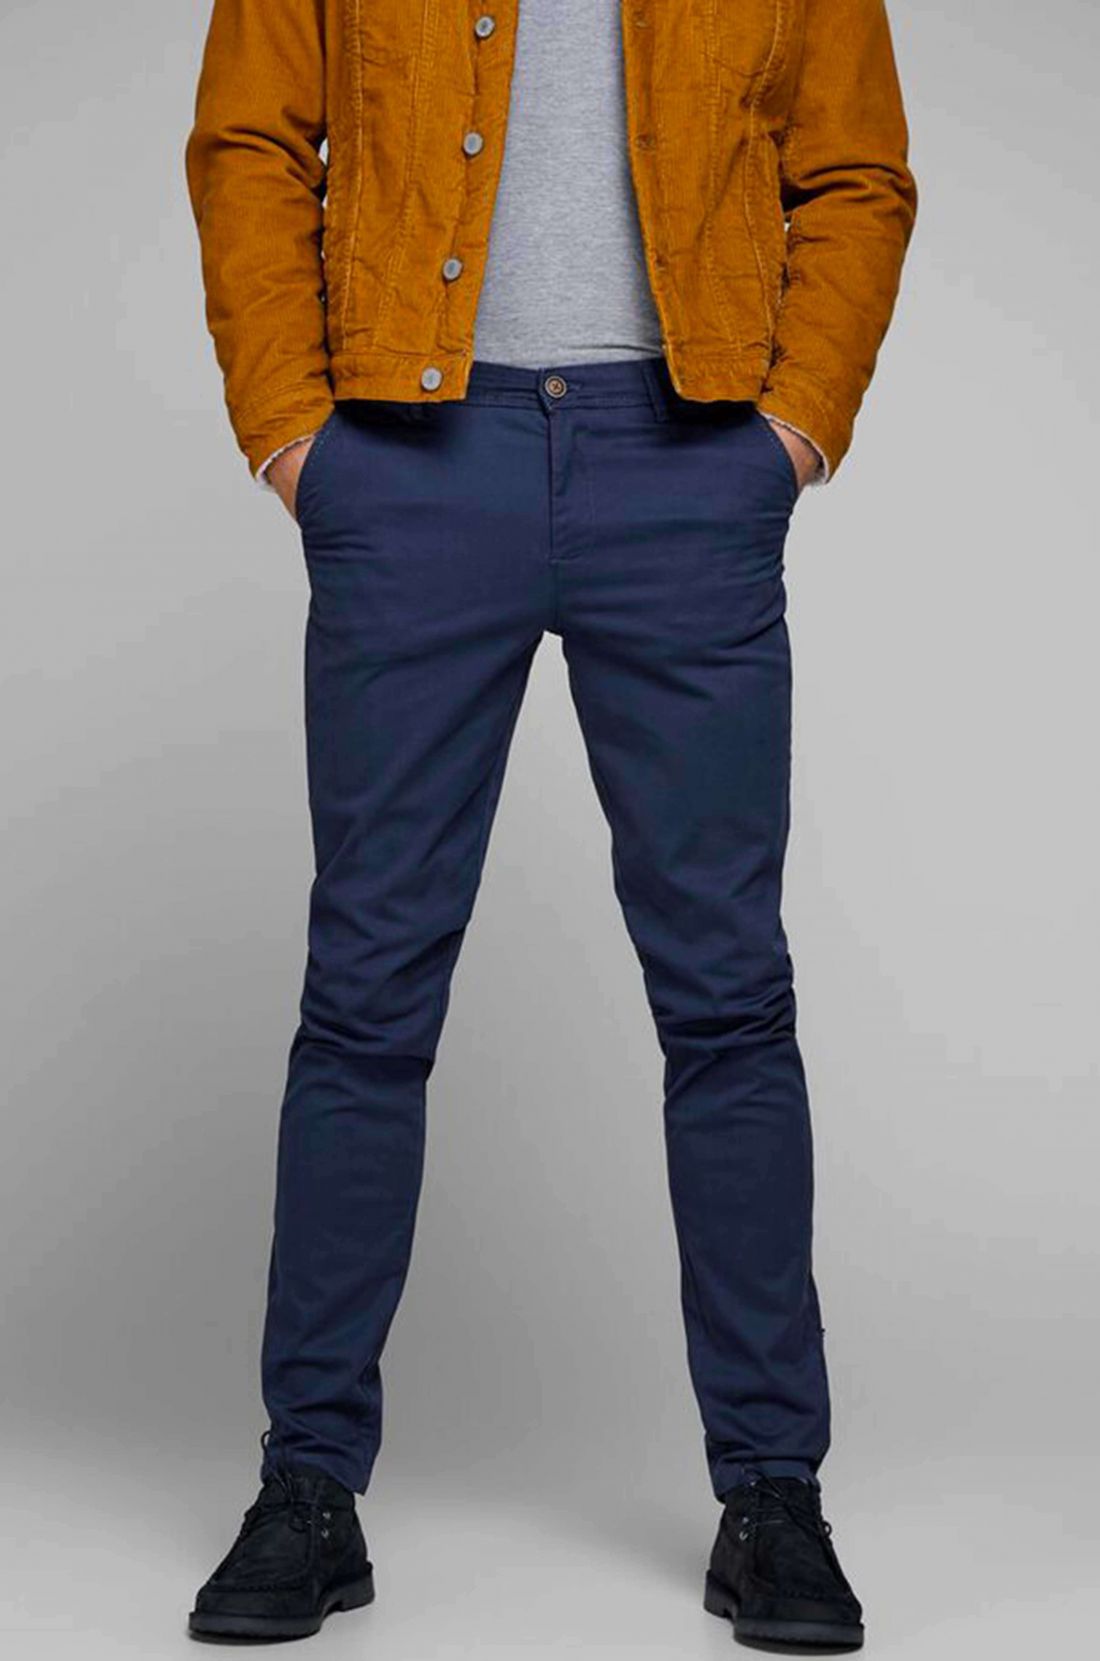 CHINO HOMME MARINE MARCO LONGUEUR 34